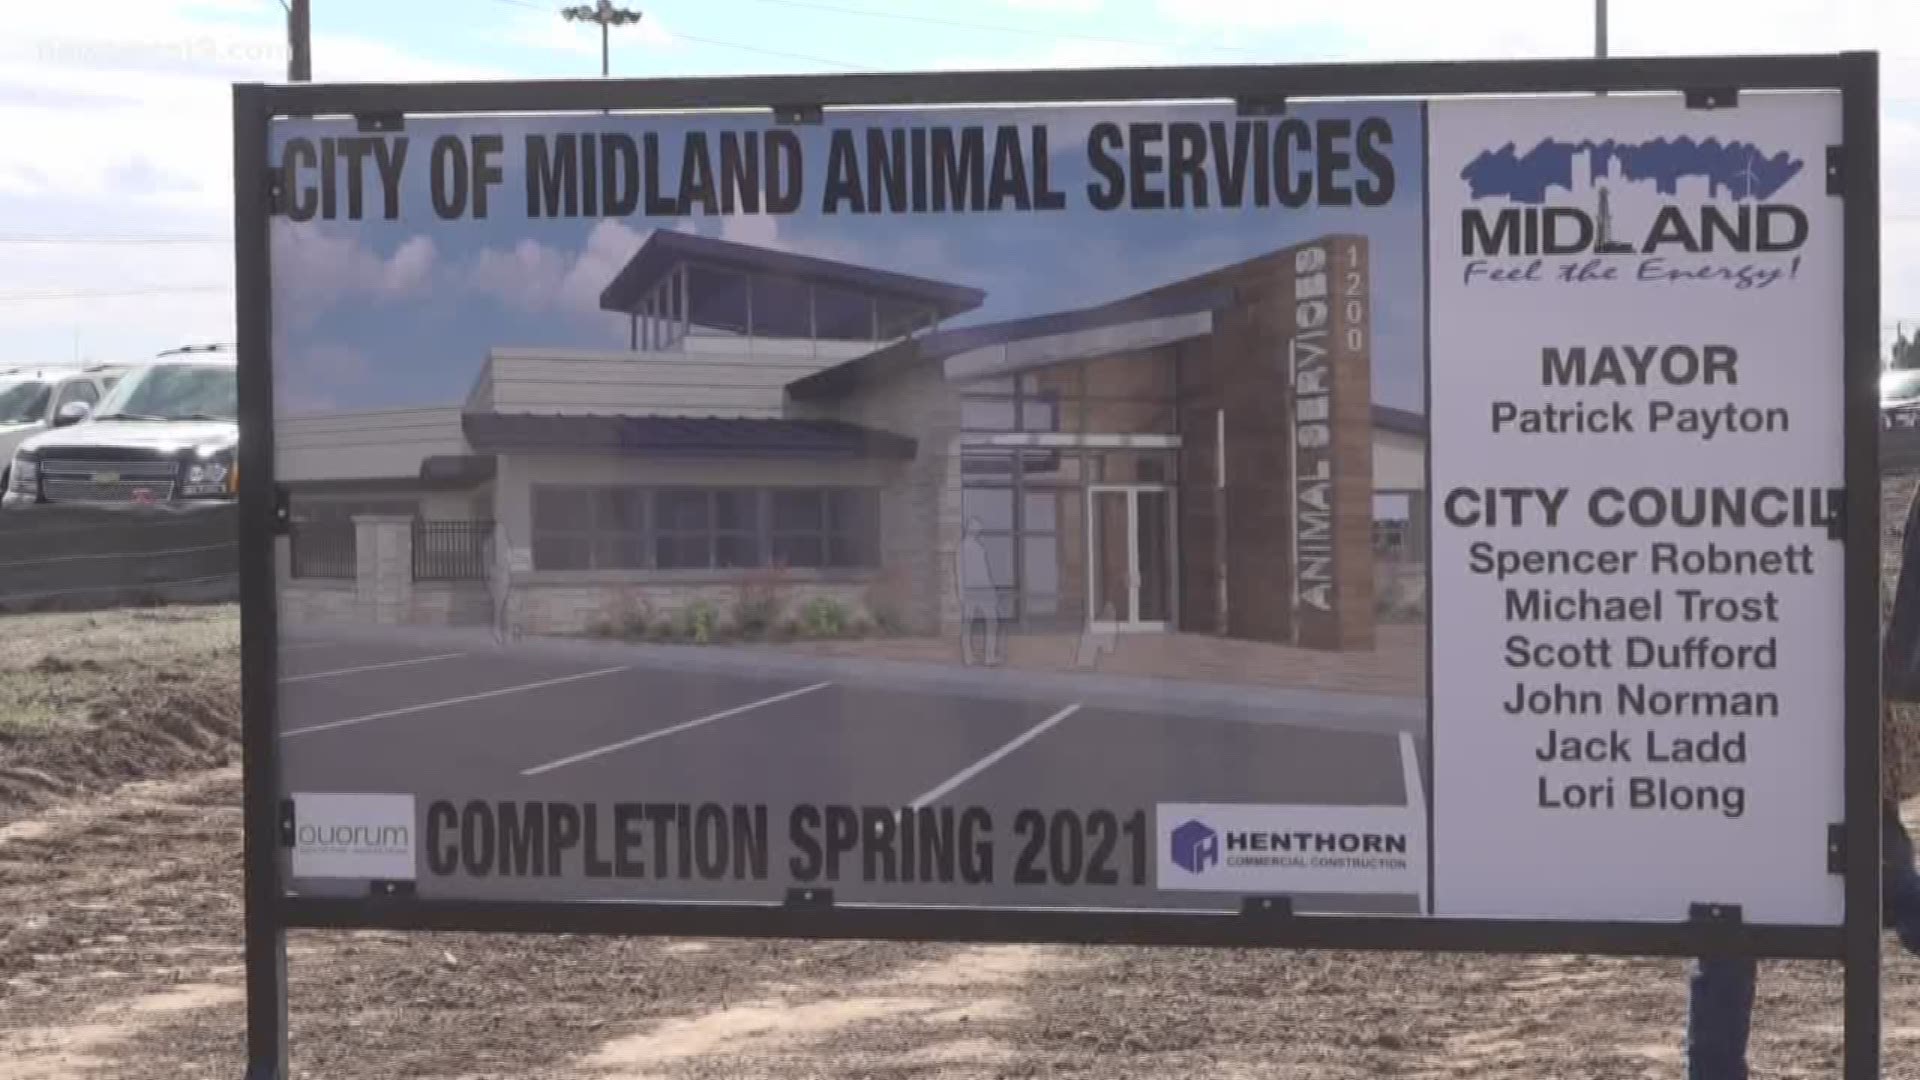 The City of Midland broke ground on a new animal shelter that will be located behind the current one.